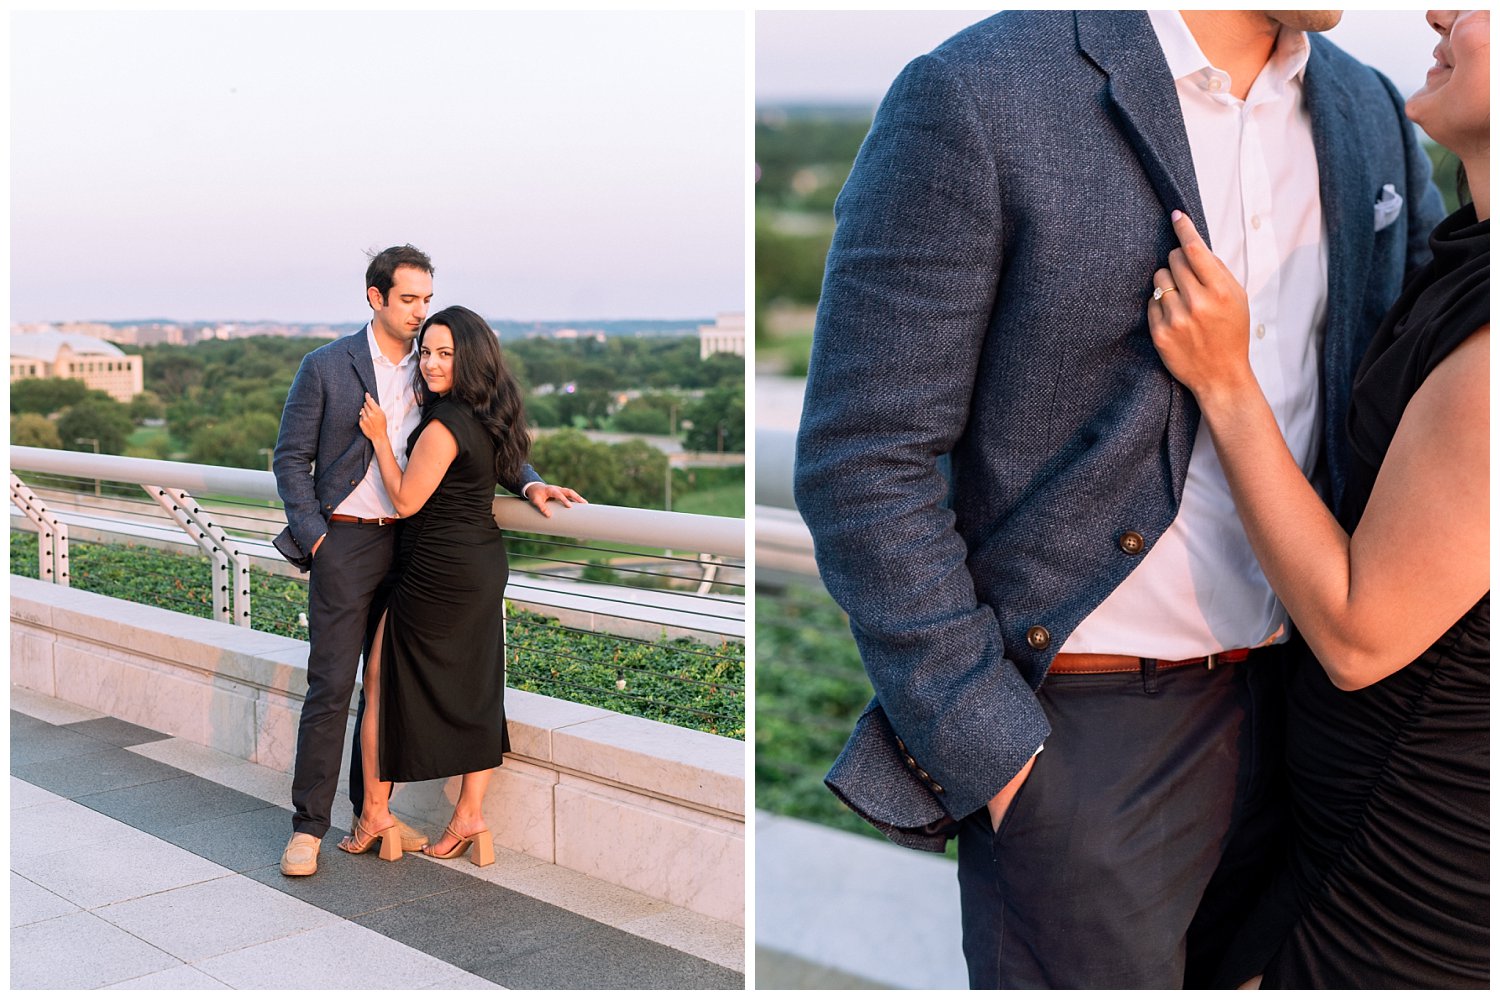 Sunset date night engagement session at the Kennedy Center in Washington, DC.